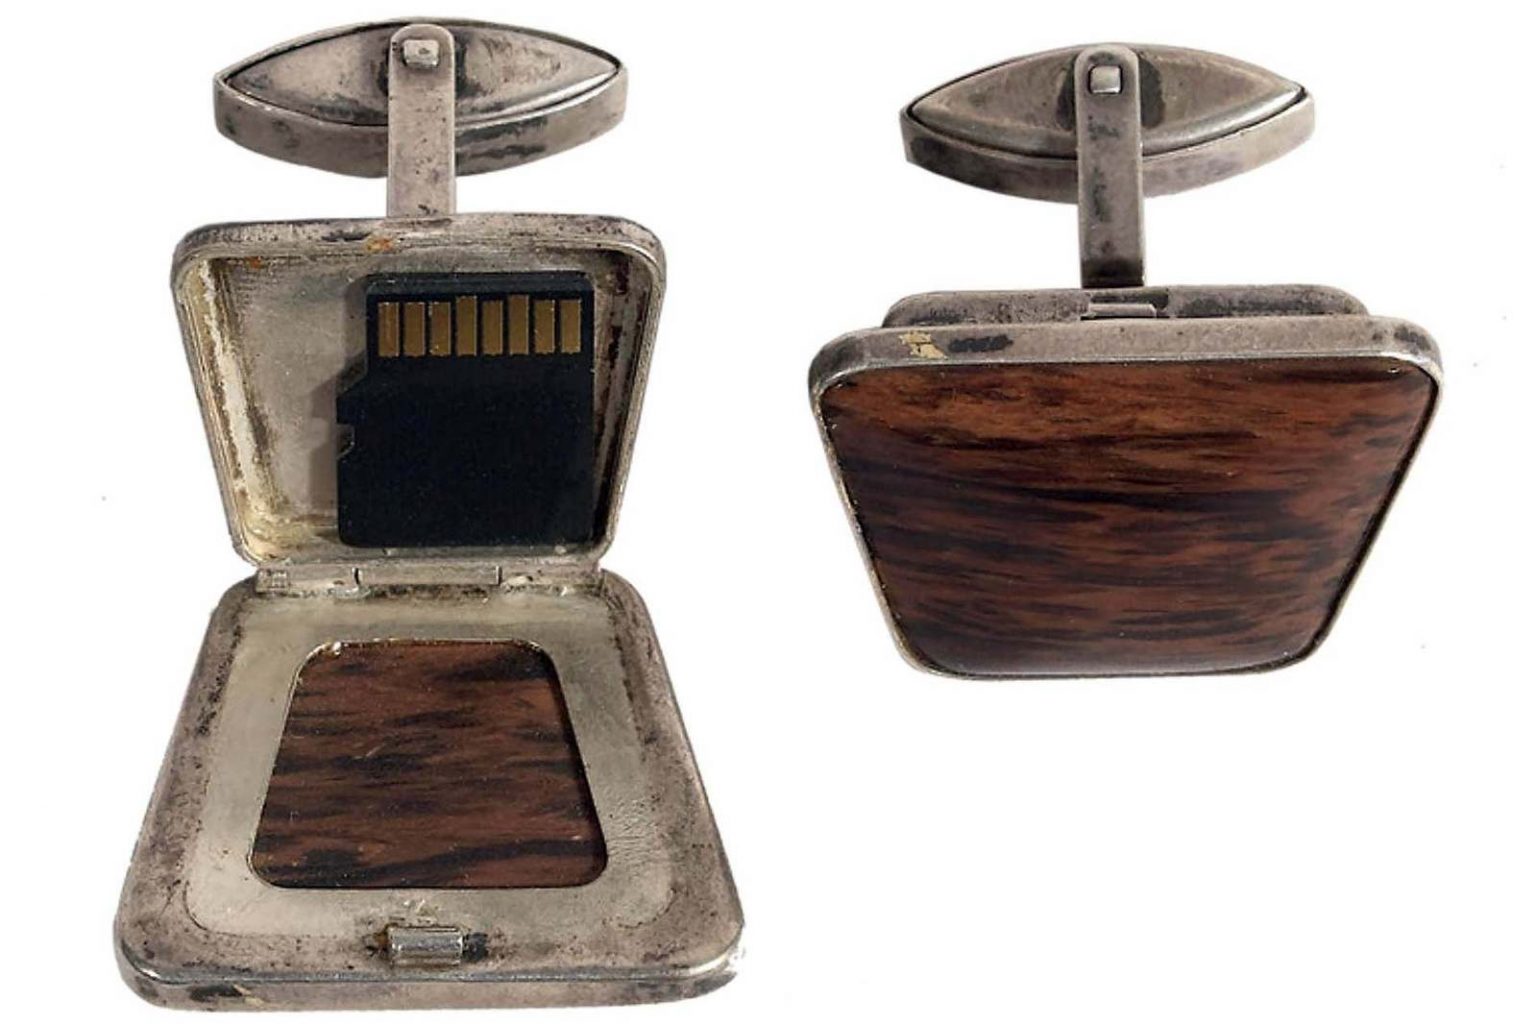 e cufflinks (silver 875/1000) manufactured in Sverdlovsk in 1961 for the KGB (USSR), with a secret compartment (microdot/microfilm, etc.). Production from 1958-1967. Dauphine Market - Florence Glassmaker